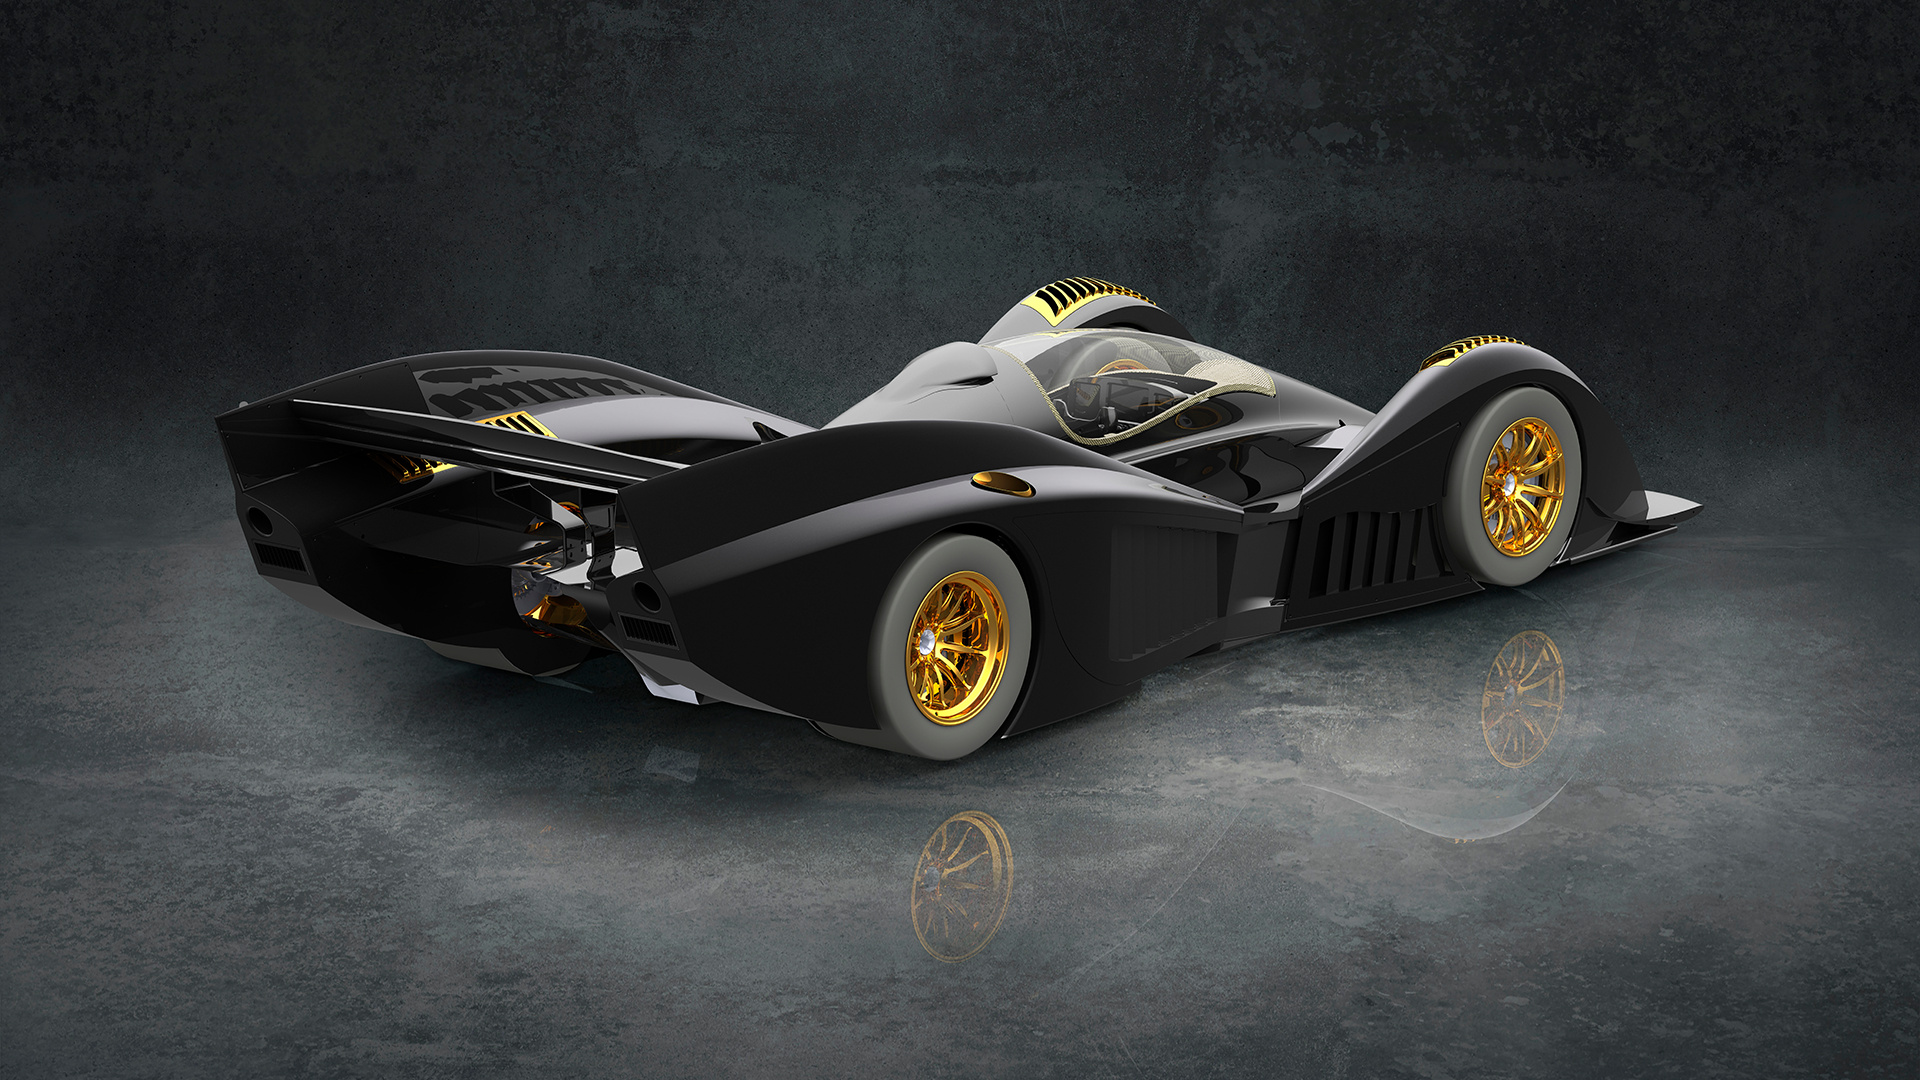 SMALL_Rodin_Cars_officially_announce_1200_HP_sub-700kg_track_hypercar_the_FZERO_is_coming_in_2023